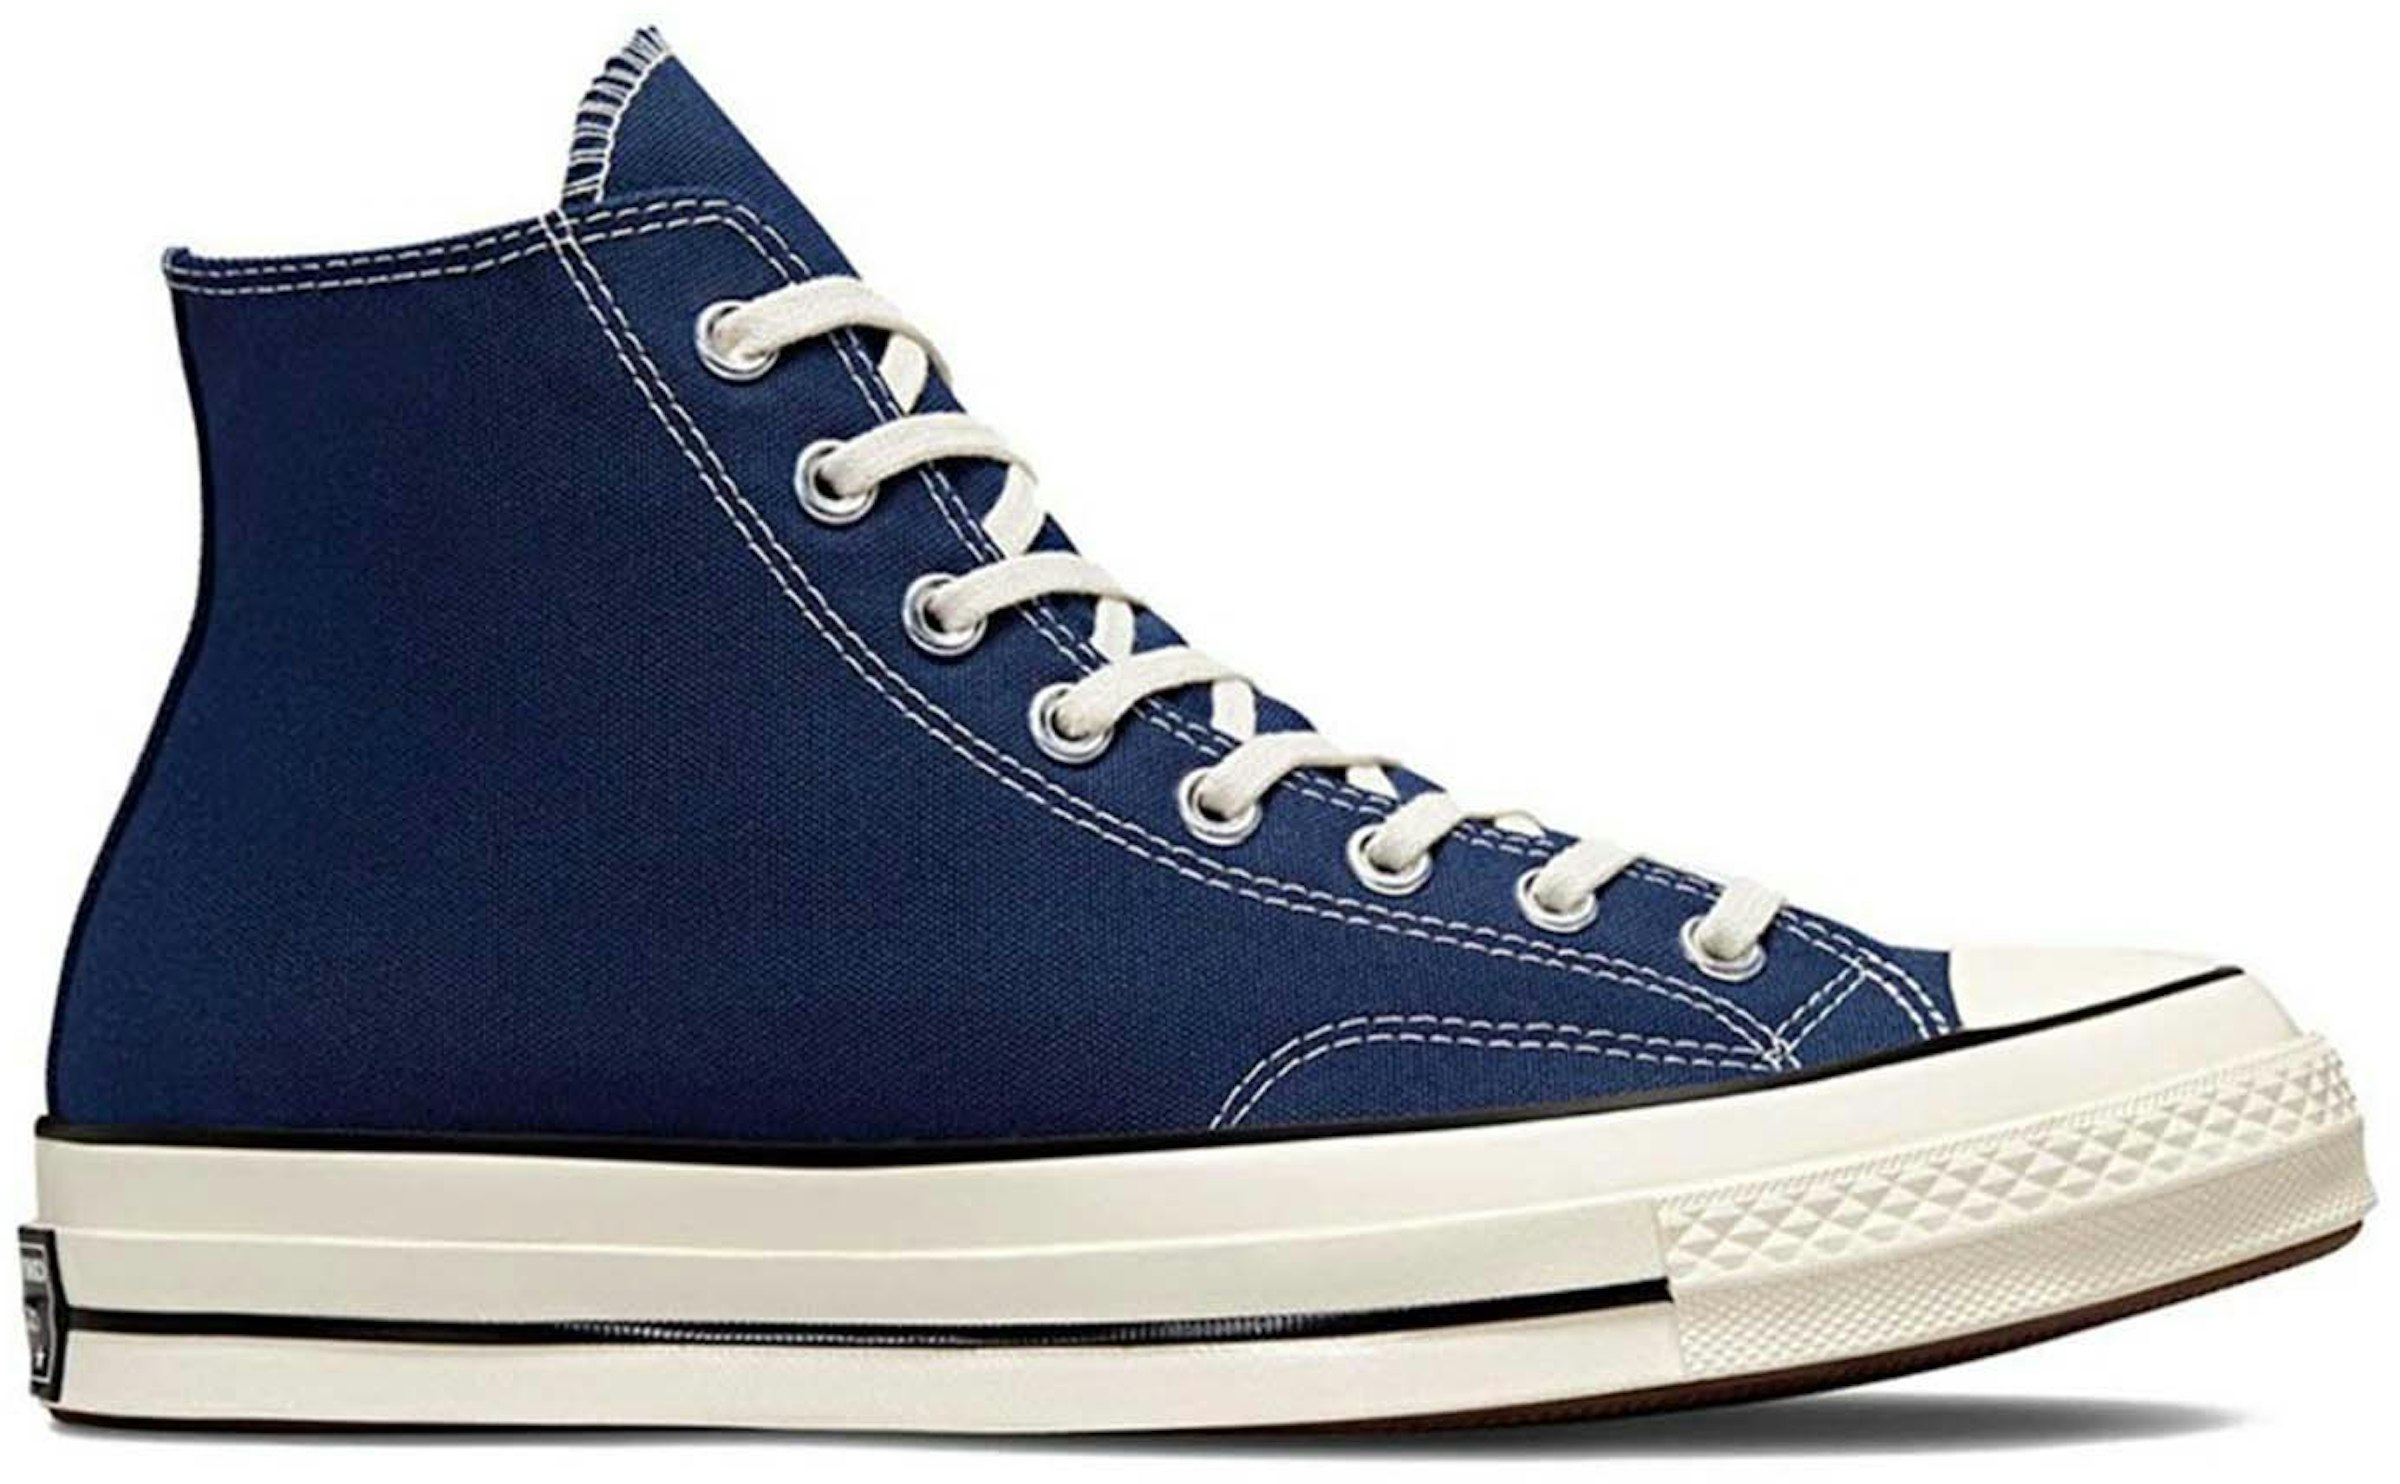 Converse Chuck All-Star 70 Hi Recycled Canvas Midnight Navy - 172676C US